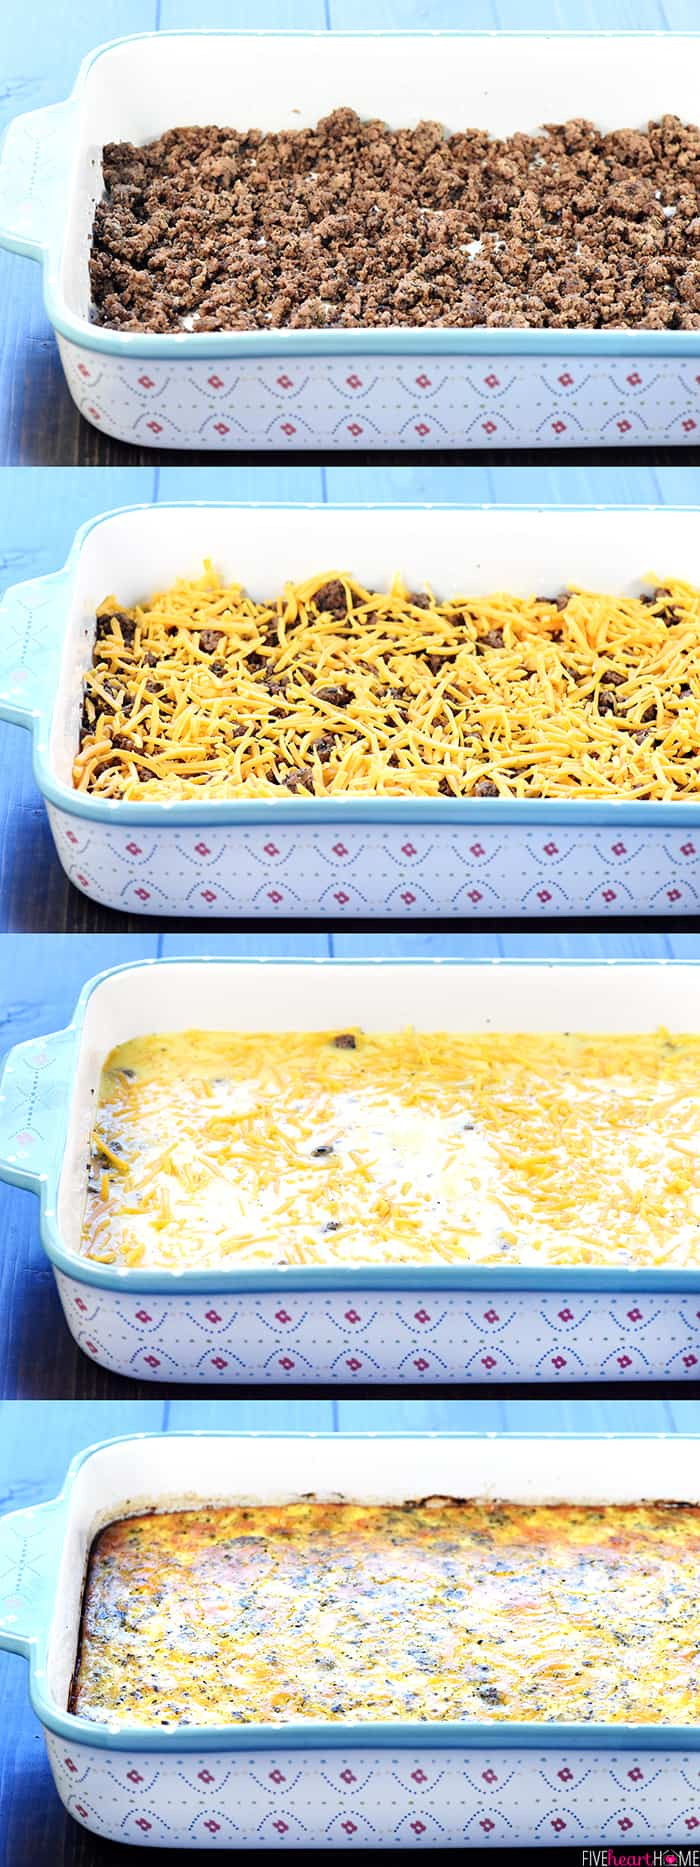 Ground Beef And Egg Casserole
 Ground Beef Egg & Cheese Breakfast Casserole • FIVEheartHOME